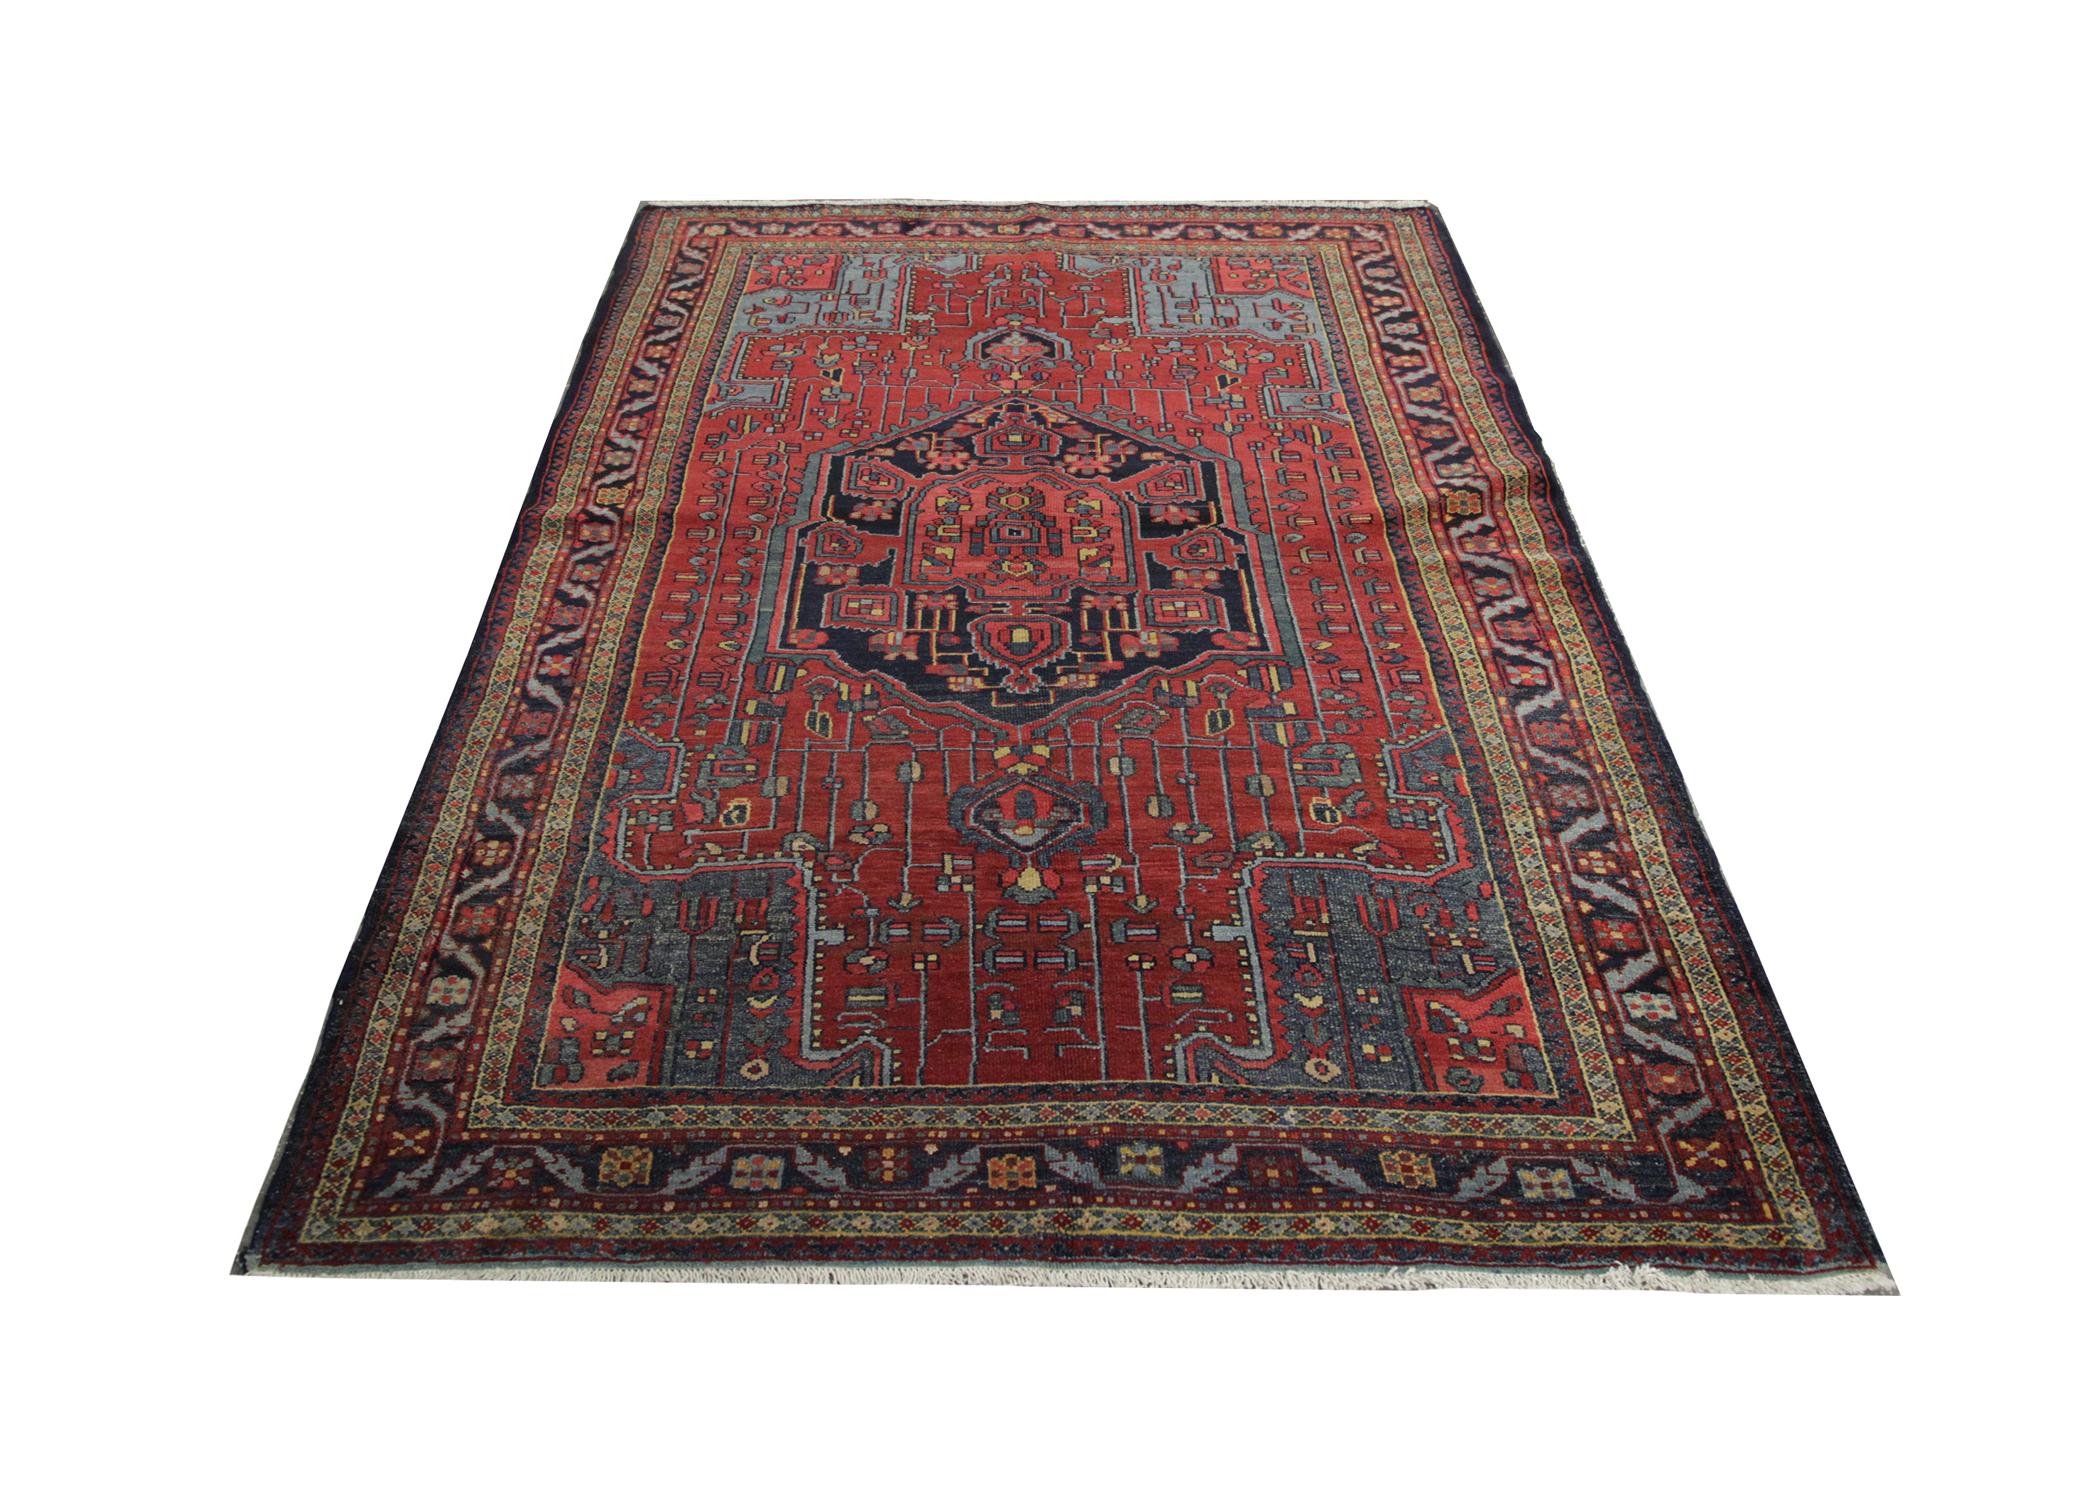 Featuring a highly-detailed handmade carpet tribal Oriental rug central medallion with intricate motifs handwoven in an asymmetrical design. Woven in blue and yellow on a red background. The central design is enclosed by a detailed layered border